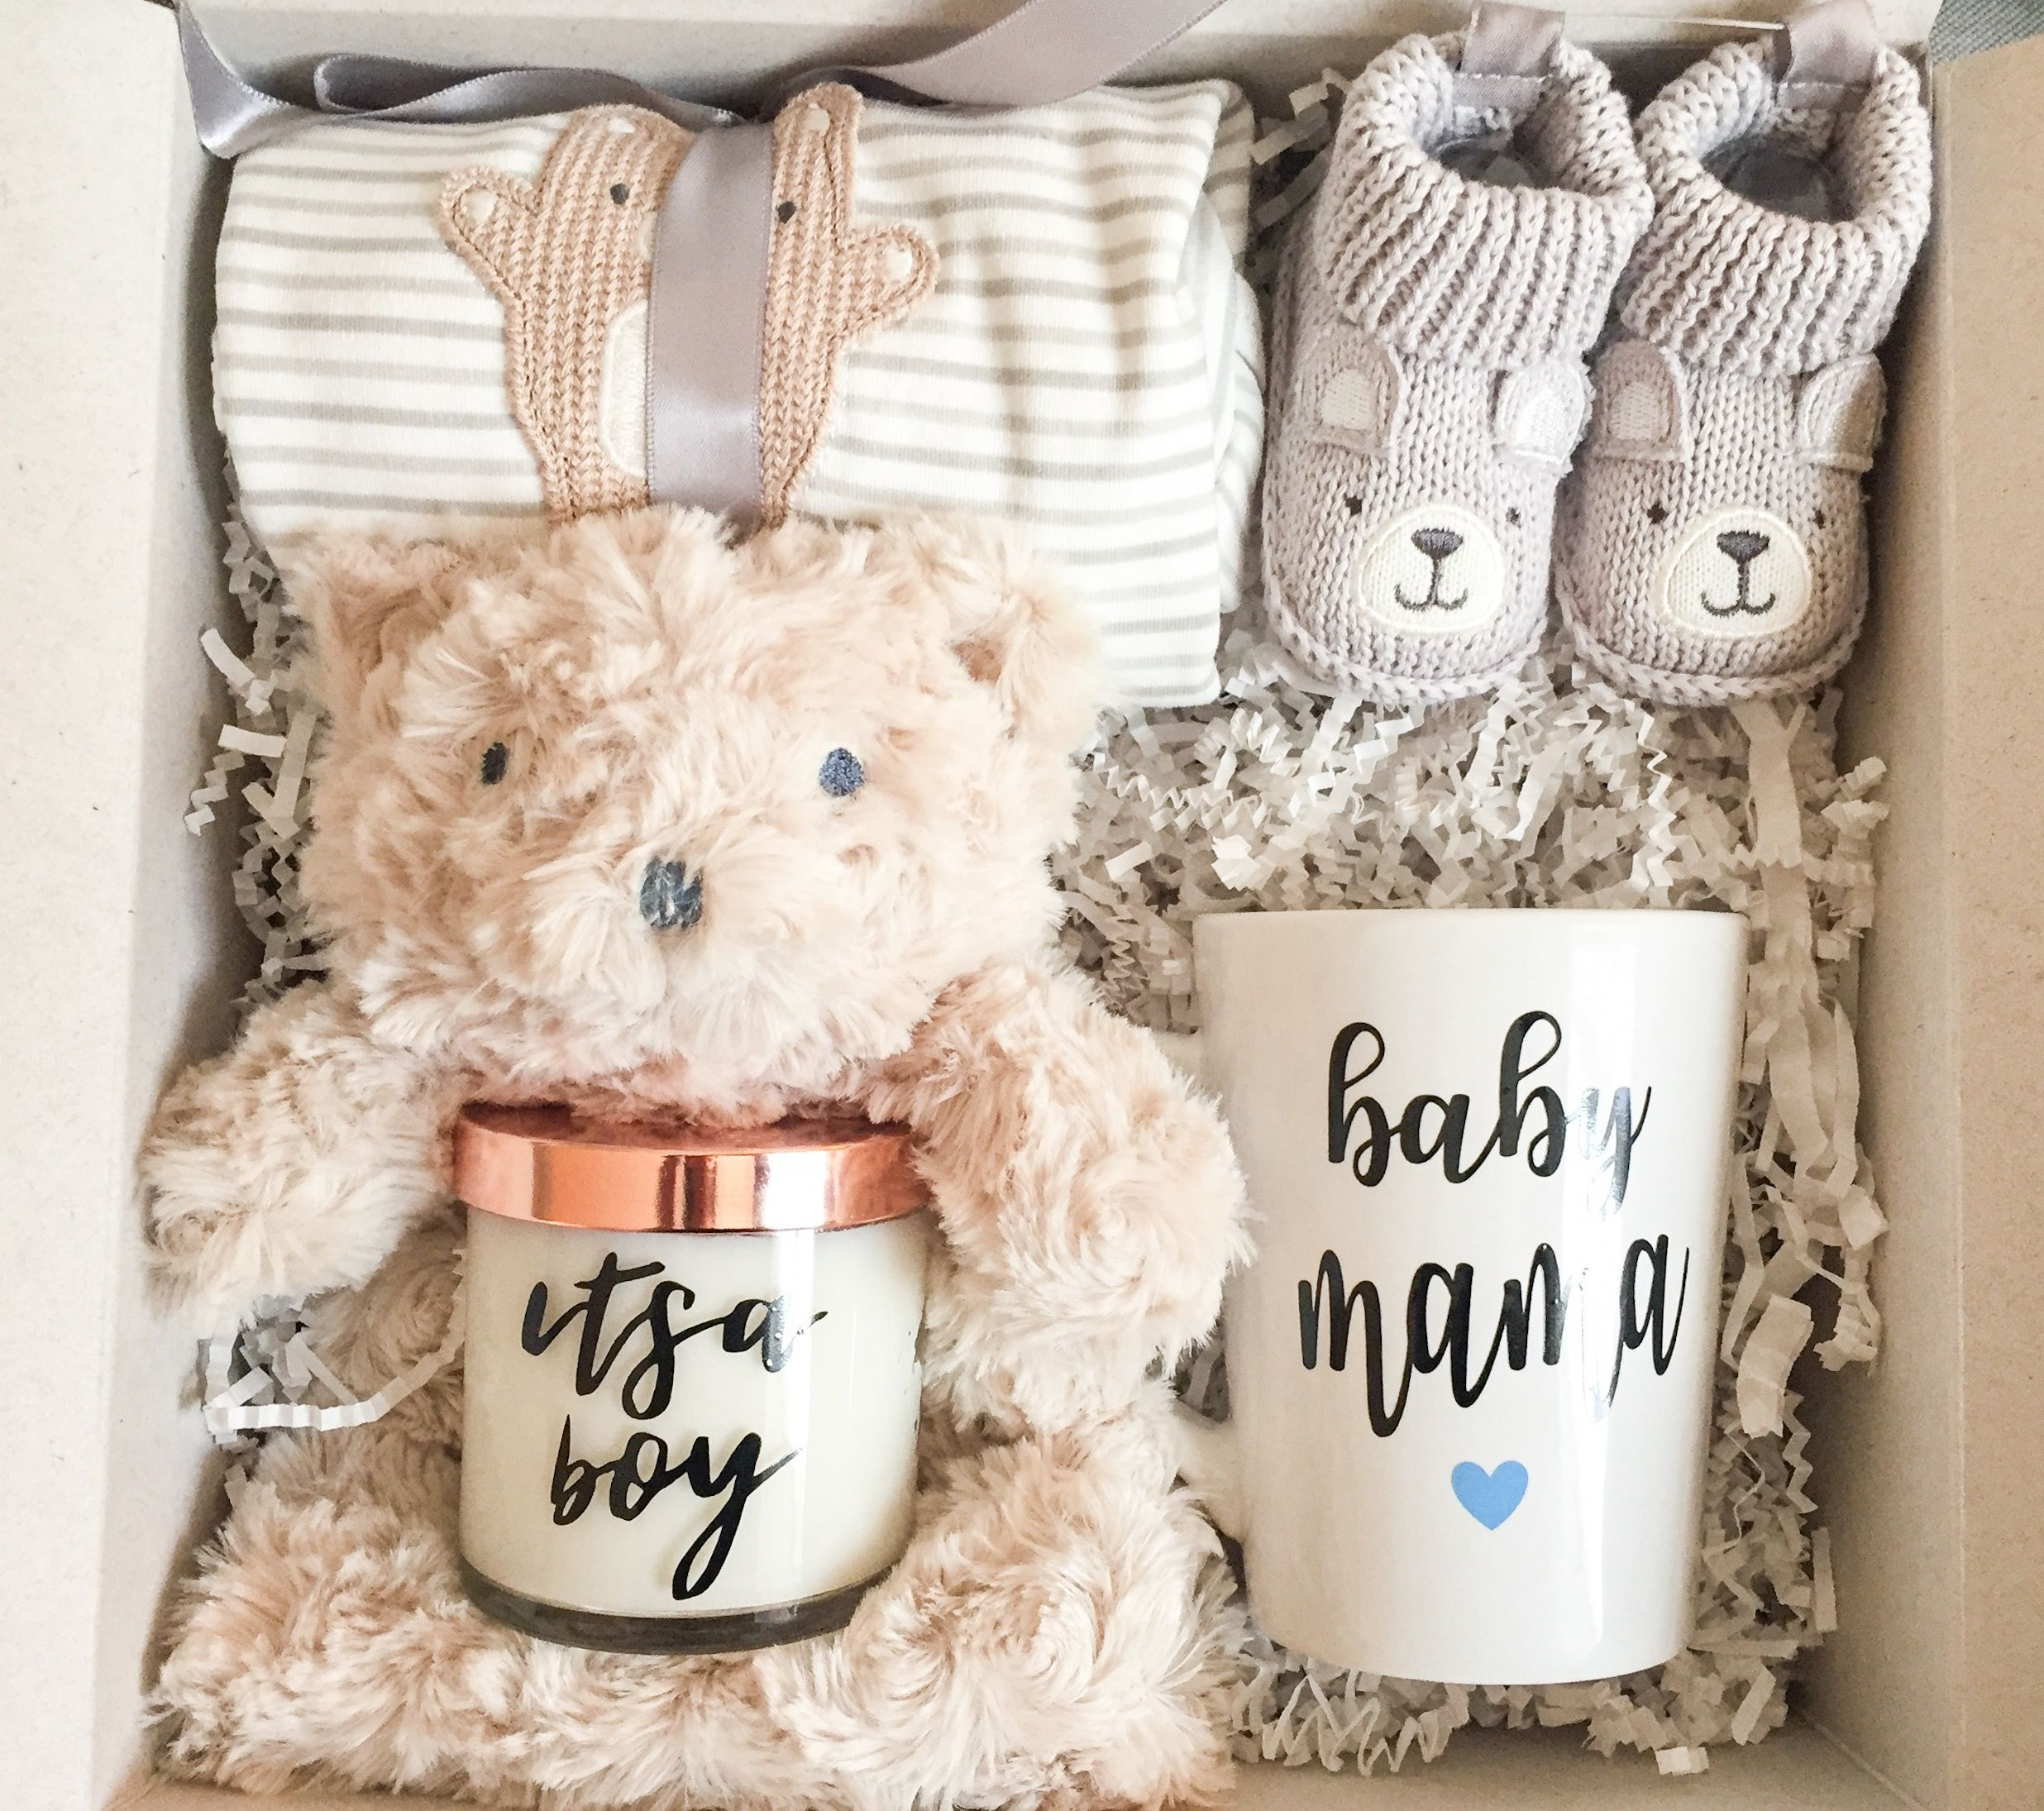 Baby Gender Reveal Gift Ideas
 It’s a Boy No 1